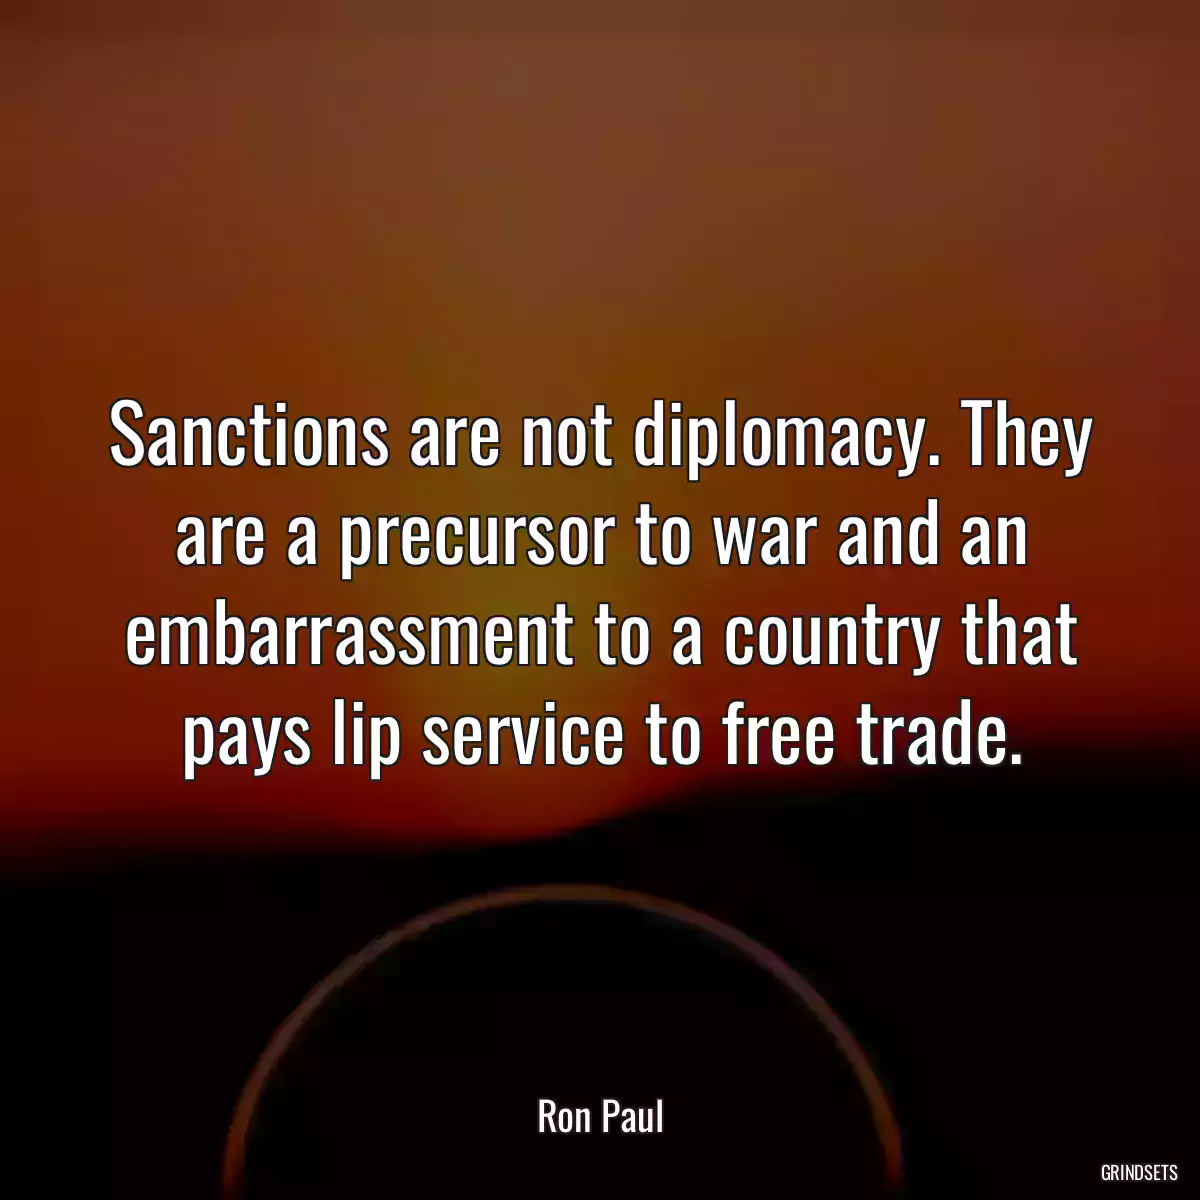 Sanctions are not diplomacy. They are a precursor to war and an embarrassment to a country that pays lip service to free trade.